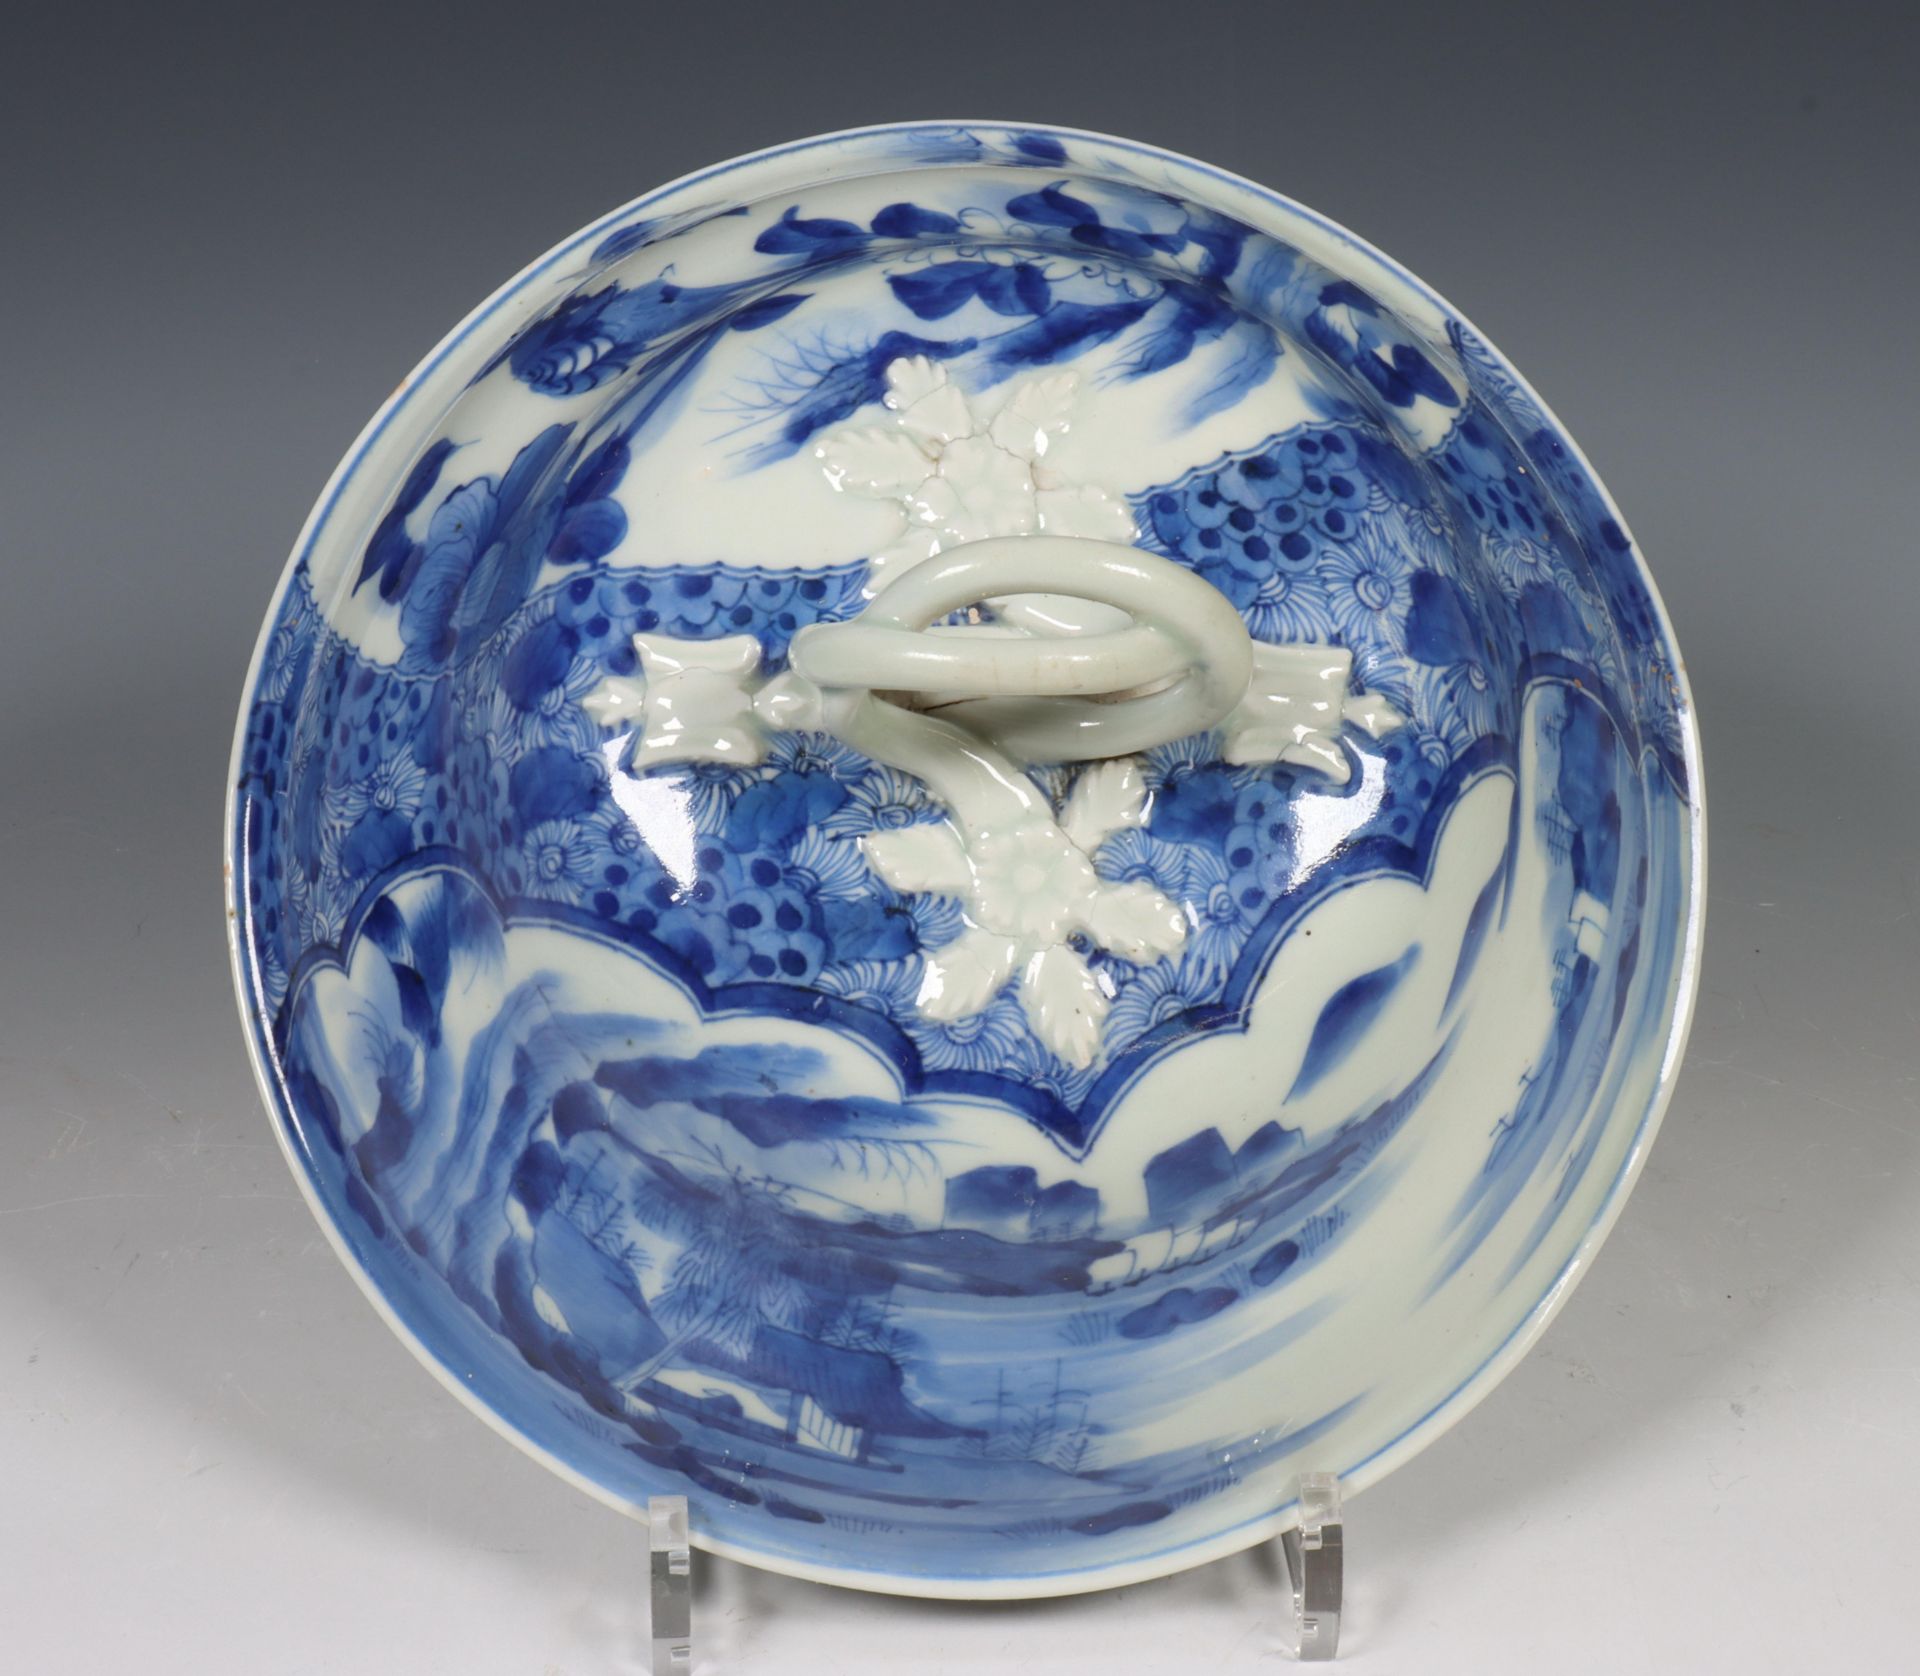 Japan, pair of Arita blue and white porcelain serving dishes and covers, 19th century, decorated - Image 11 of 12